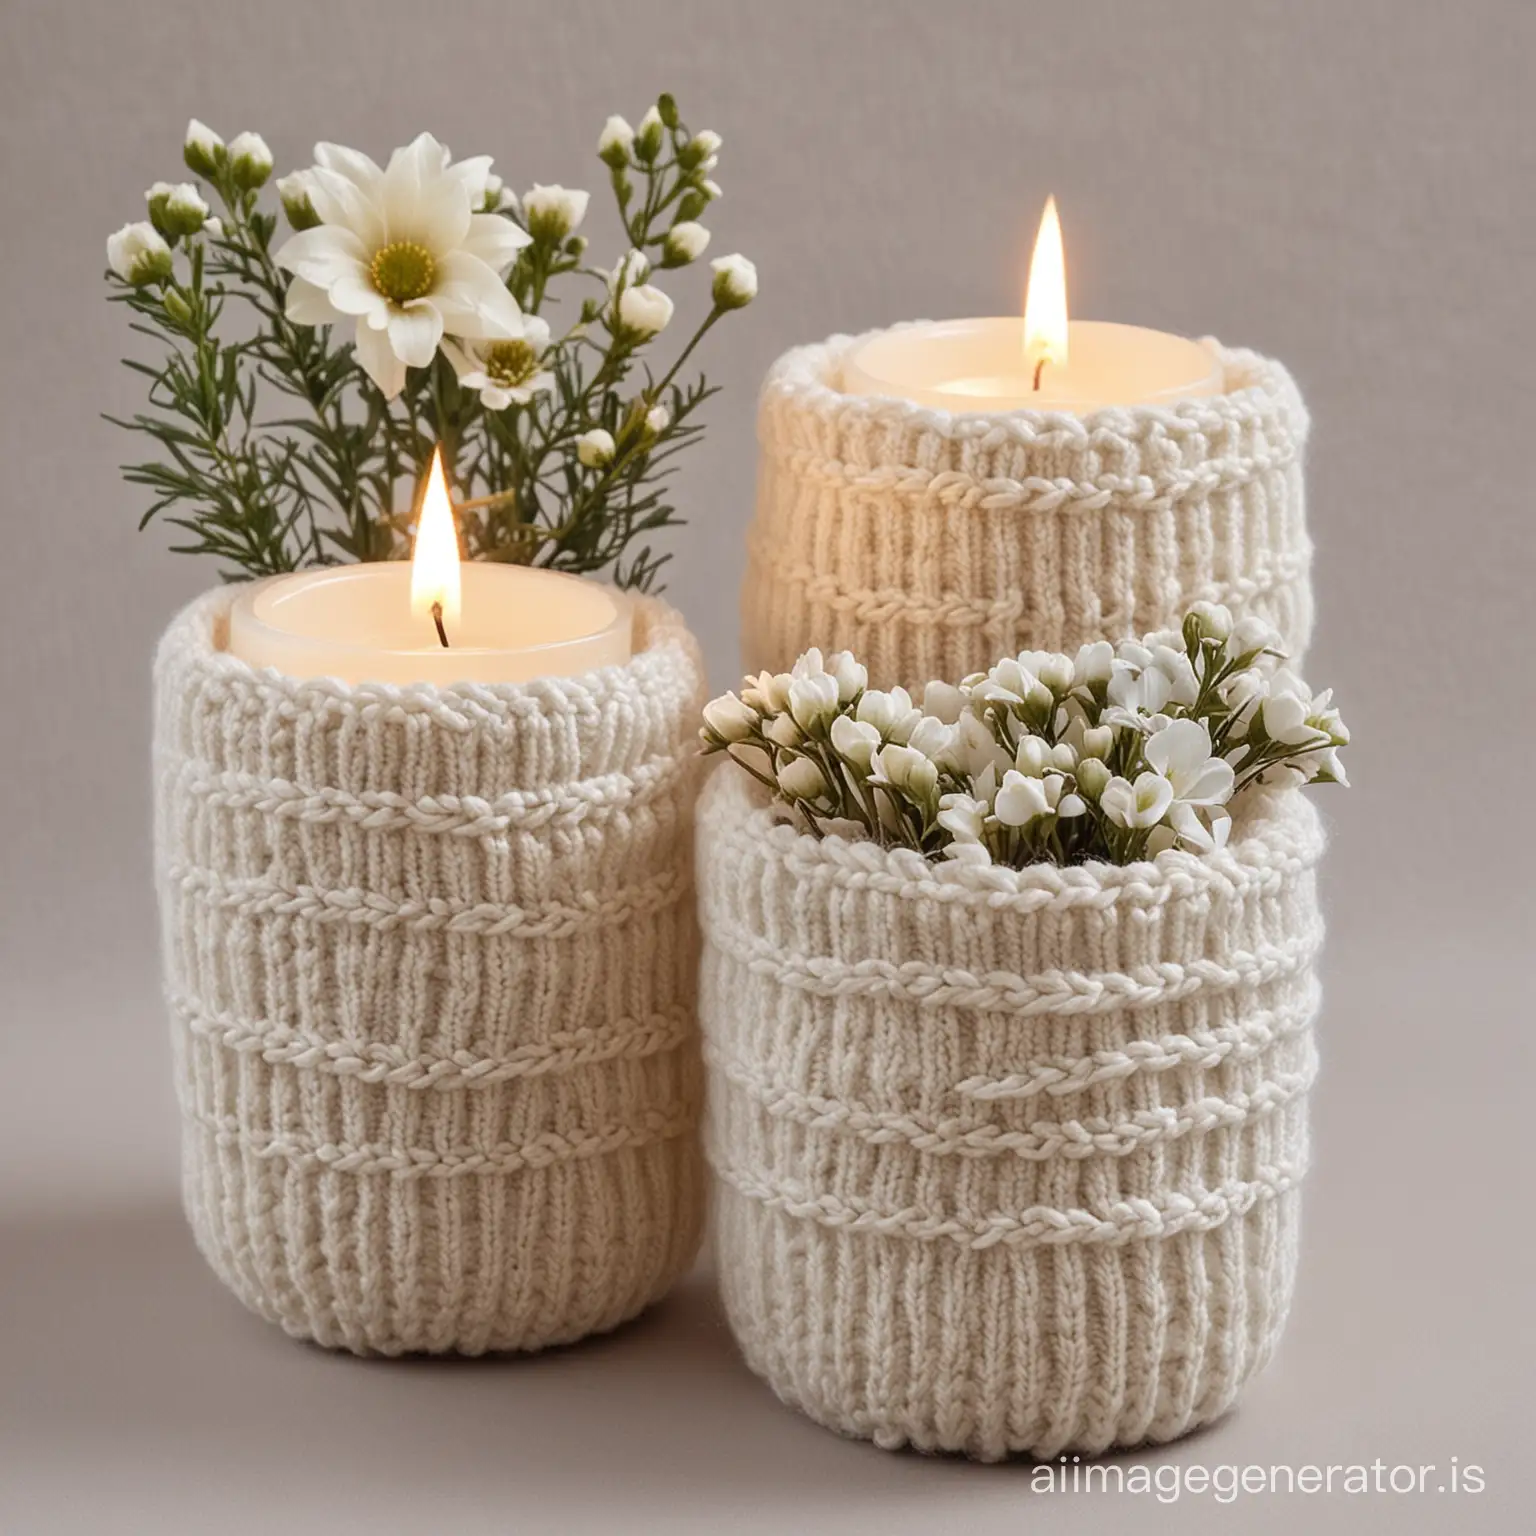 Knitted Cozy for Vases with Fresh Flowers introduces a touch of warmth to your winter wedding by wrapping vases with fresh flowers or candle jars in cozy knitted covers. Filled with winter flowers or candles, these cozies are perfect for creating a cozy, inviting atmosphere.